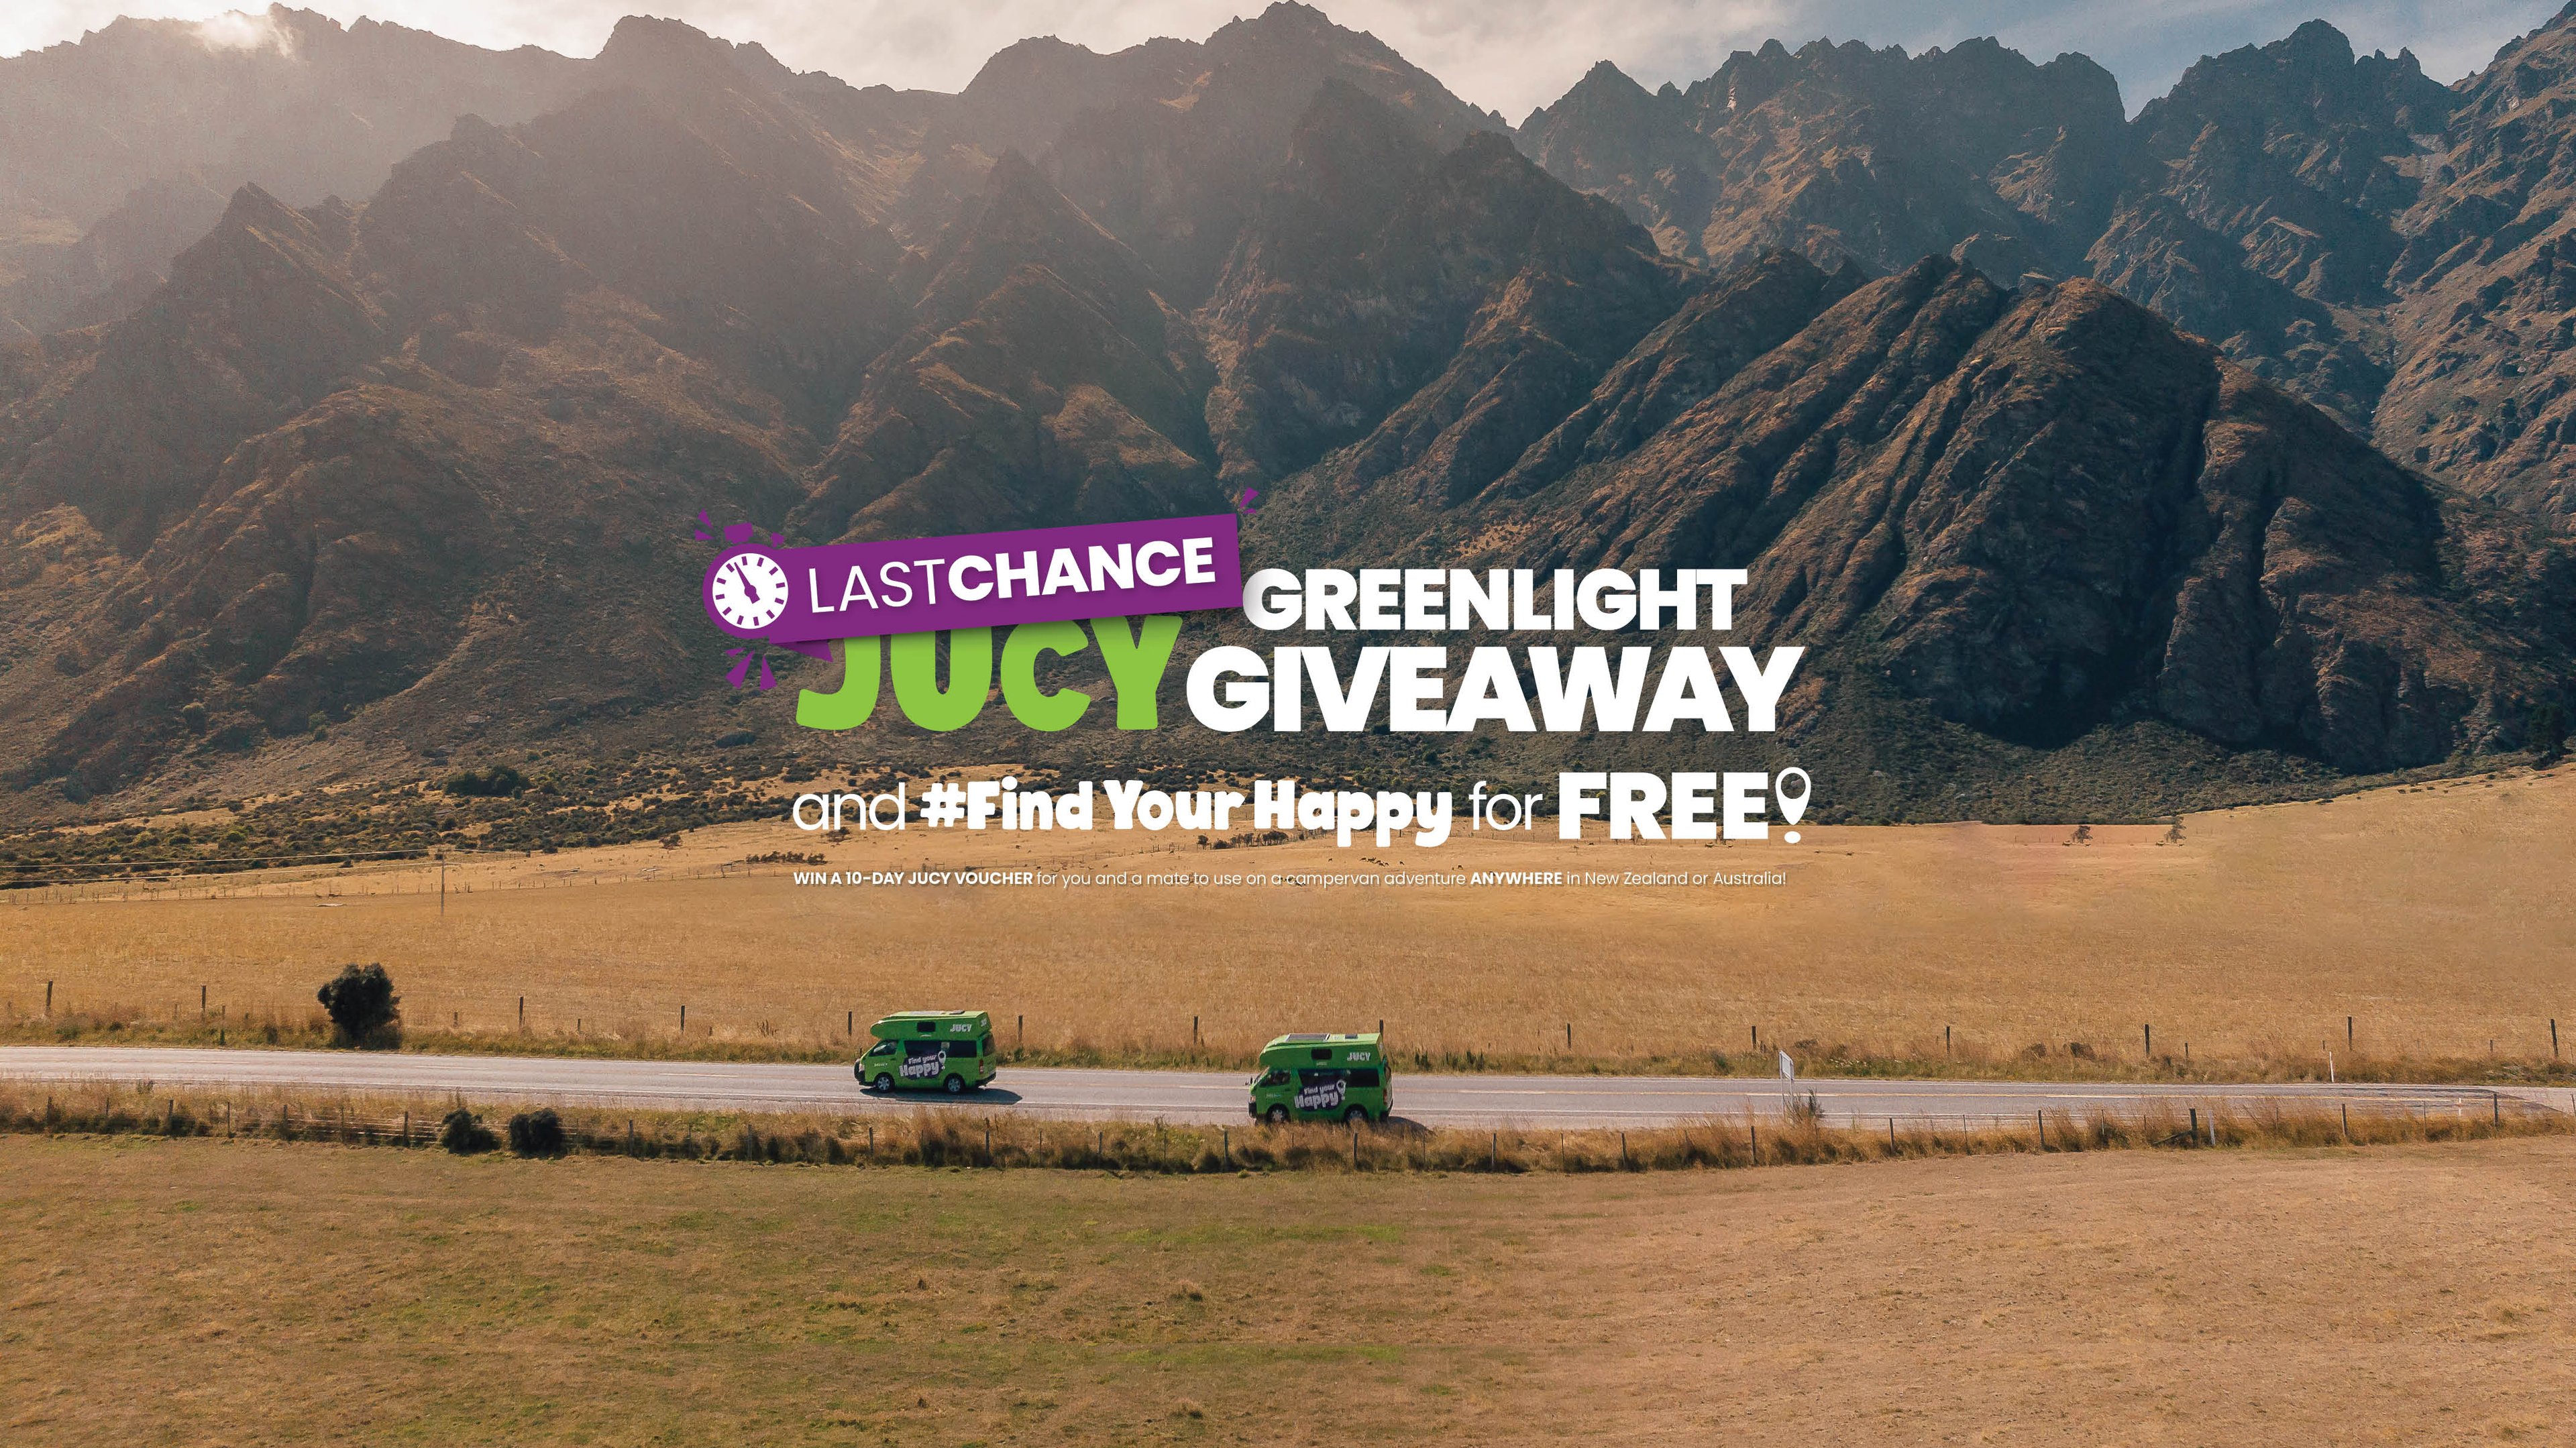 2023071 Last Chance Greenlight Giveaway YouTube Banner 2048 x 1152 v2